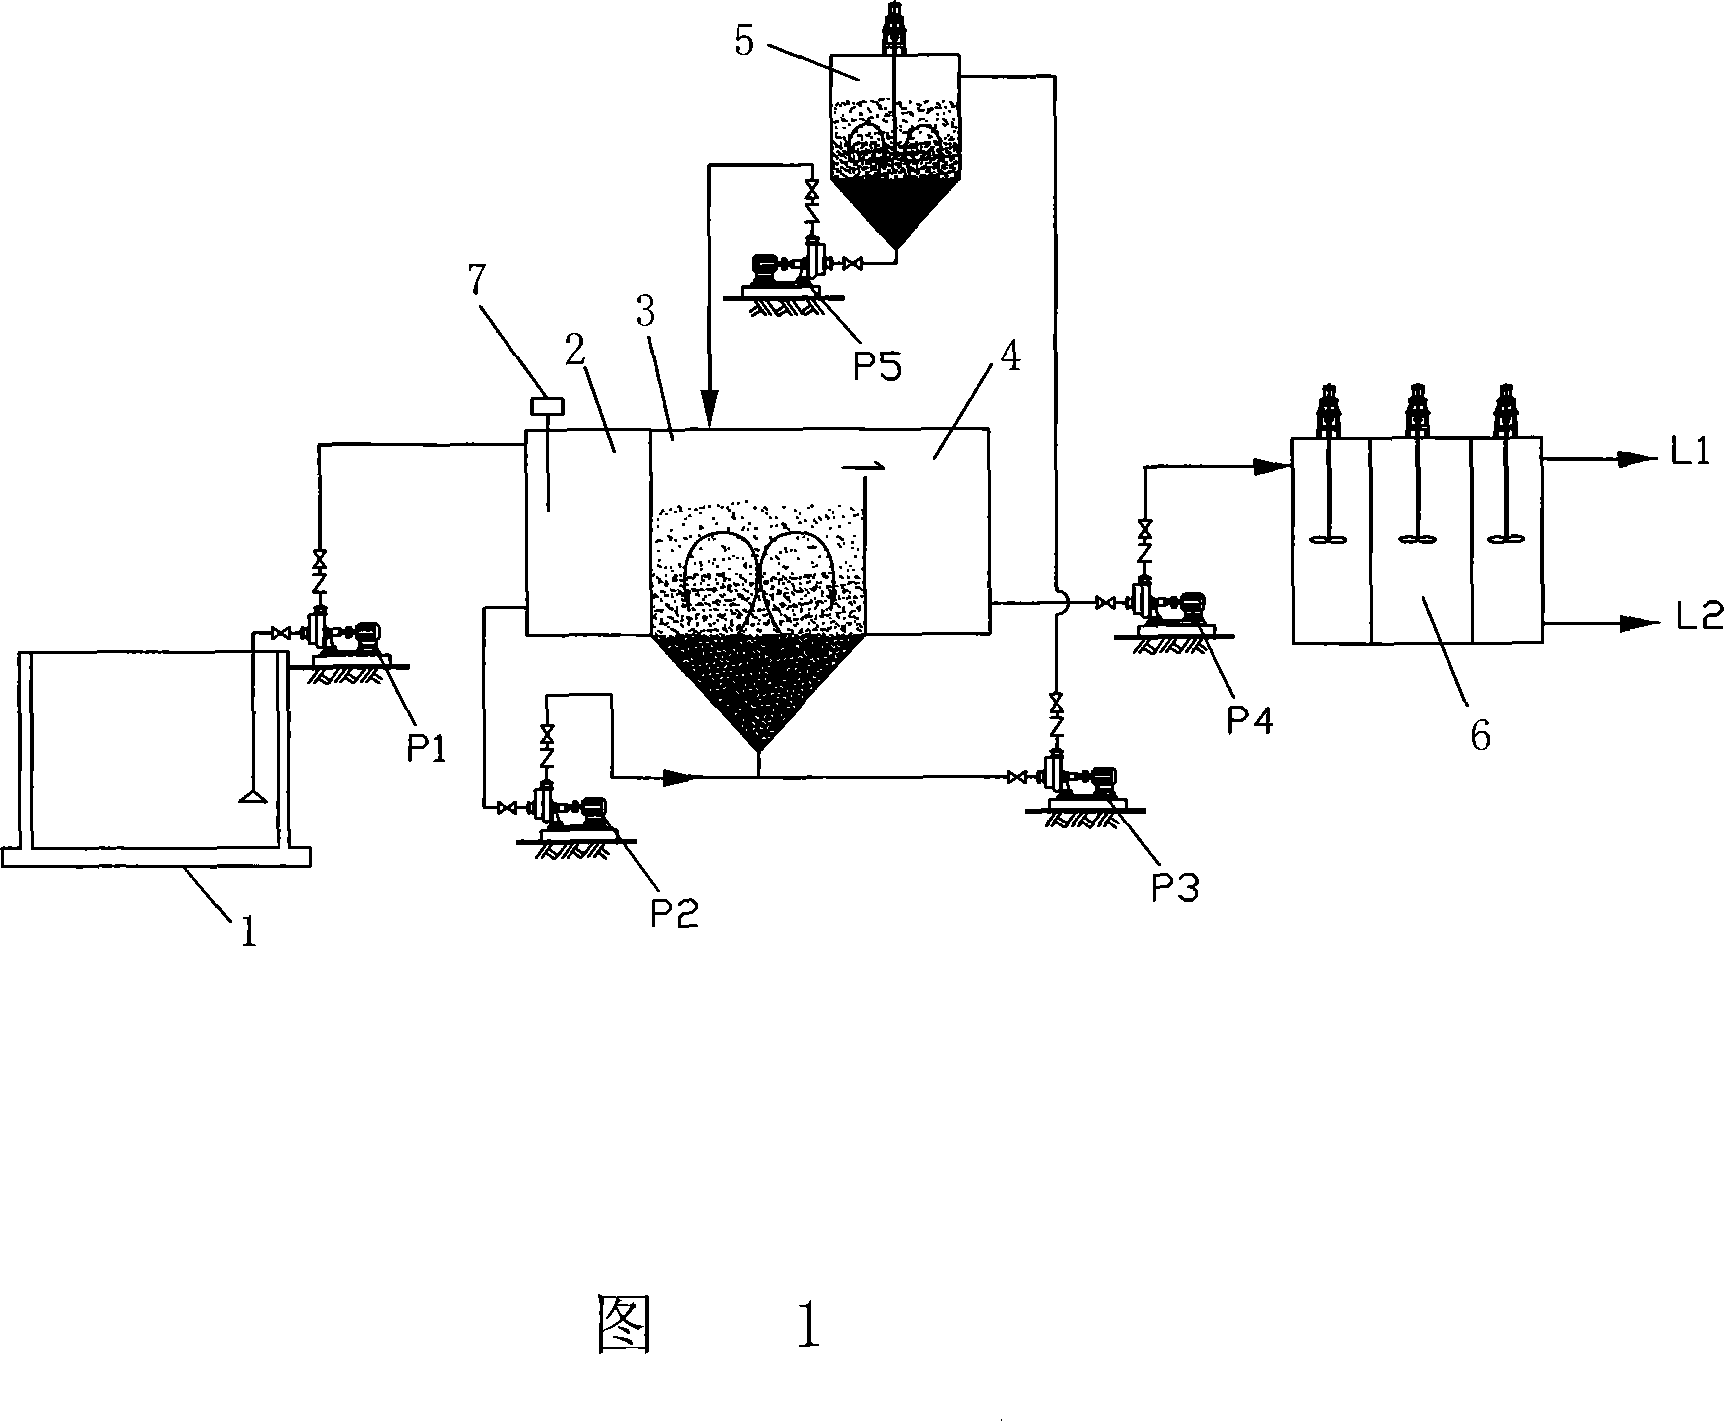 Process and apparatus for treating waste water containing metal complex